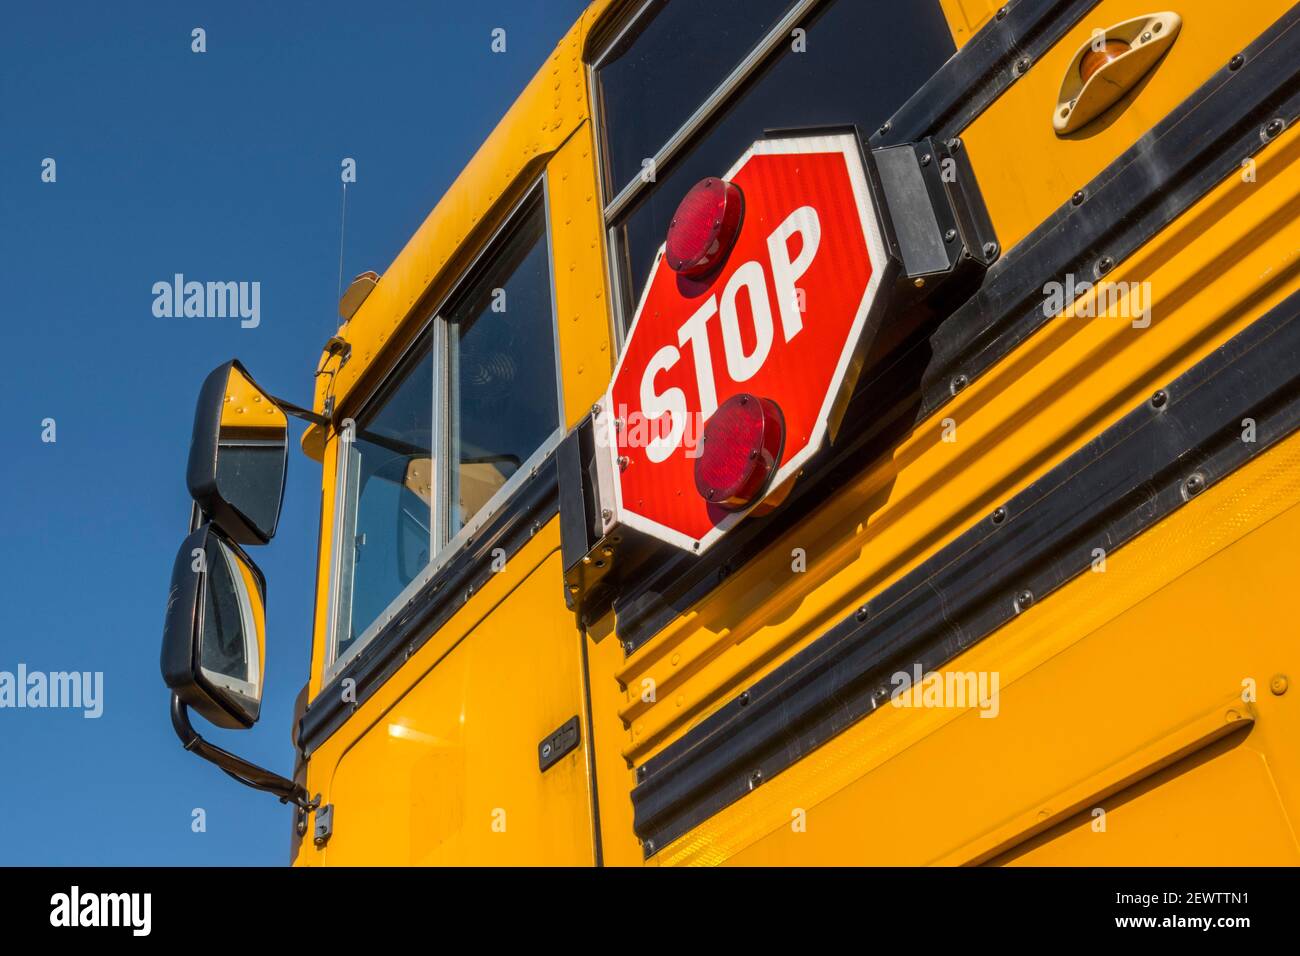 Stop sign on an iconic USA school bus Stock Photo